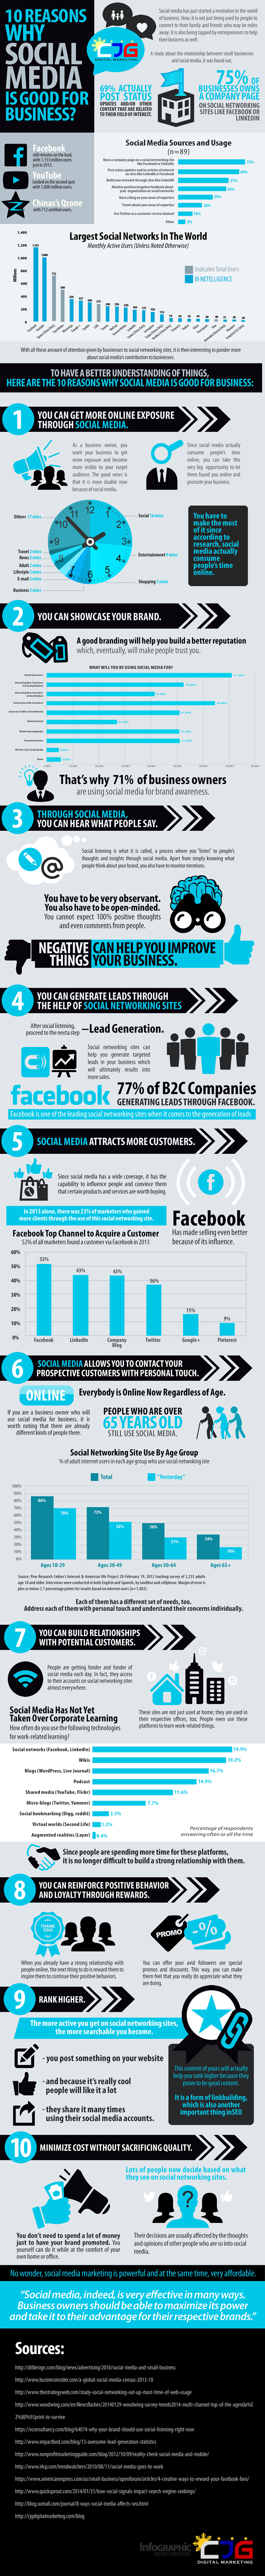 10 Reasons Why Social Media is Good for Business? (Infographic) - An Infographic from CJG Digital Marketing